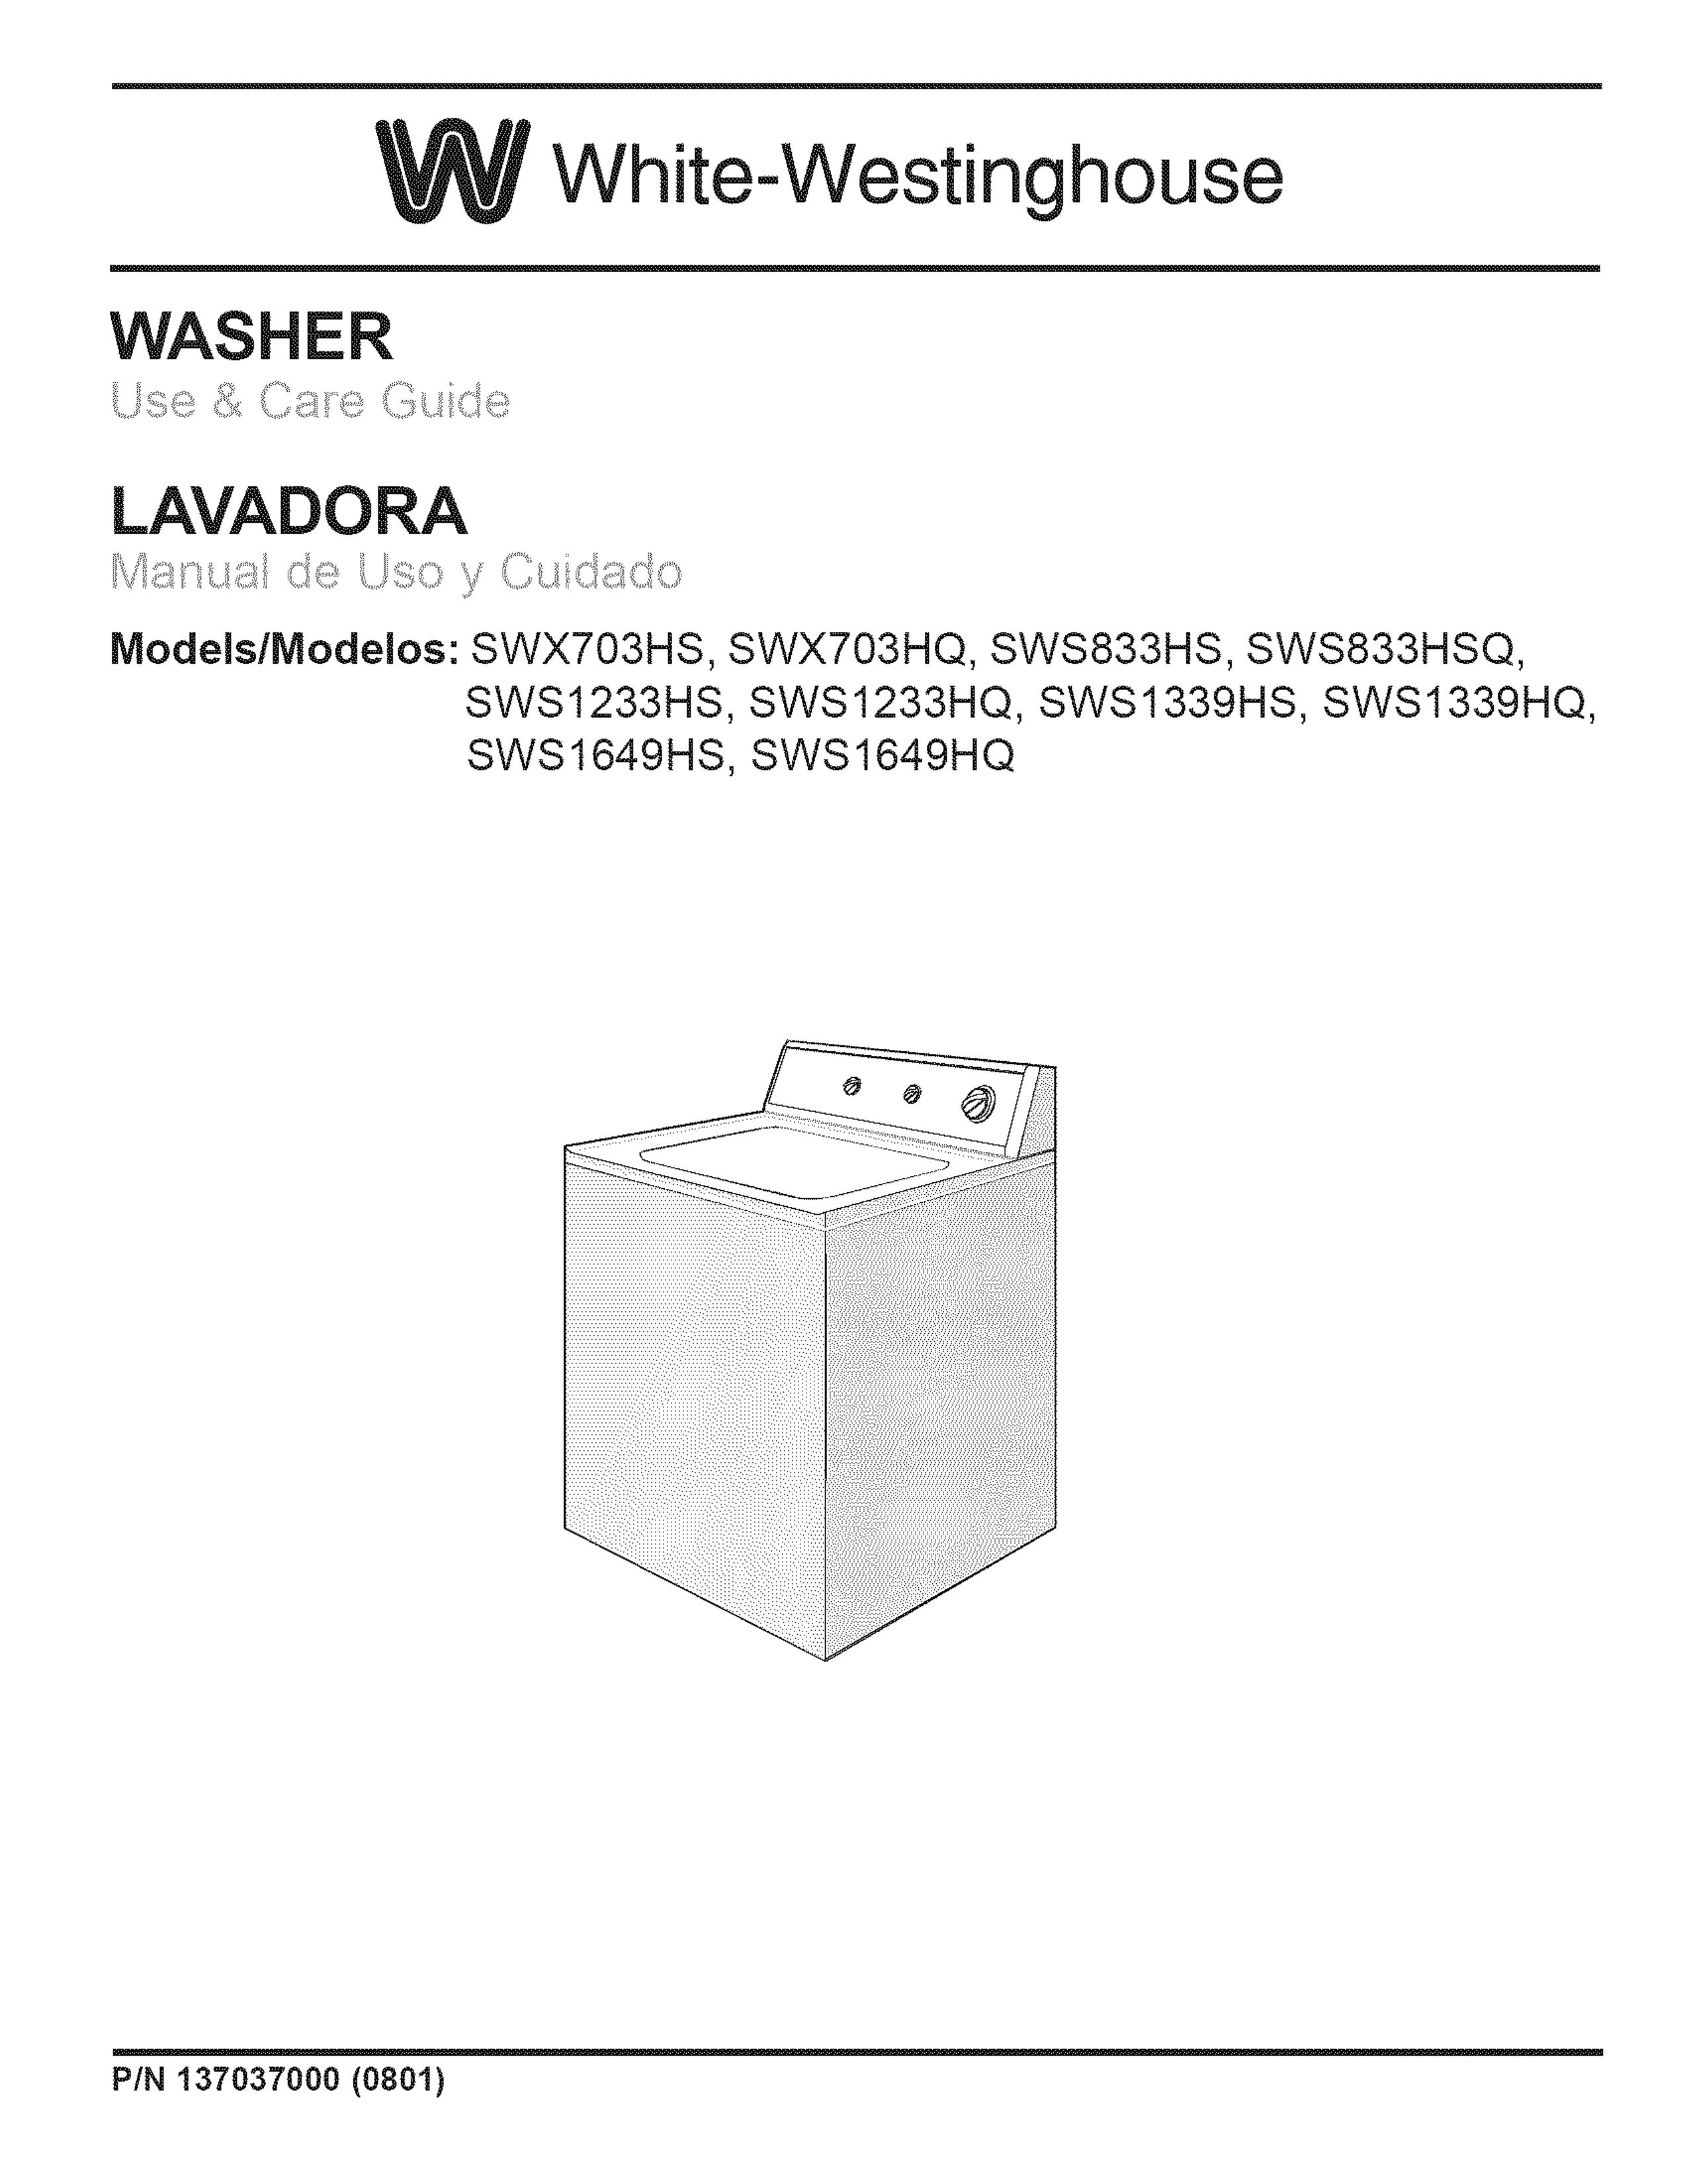 White-Westinghouse SWX703HS Washer User Manual